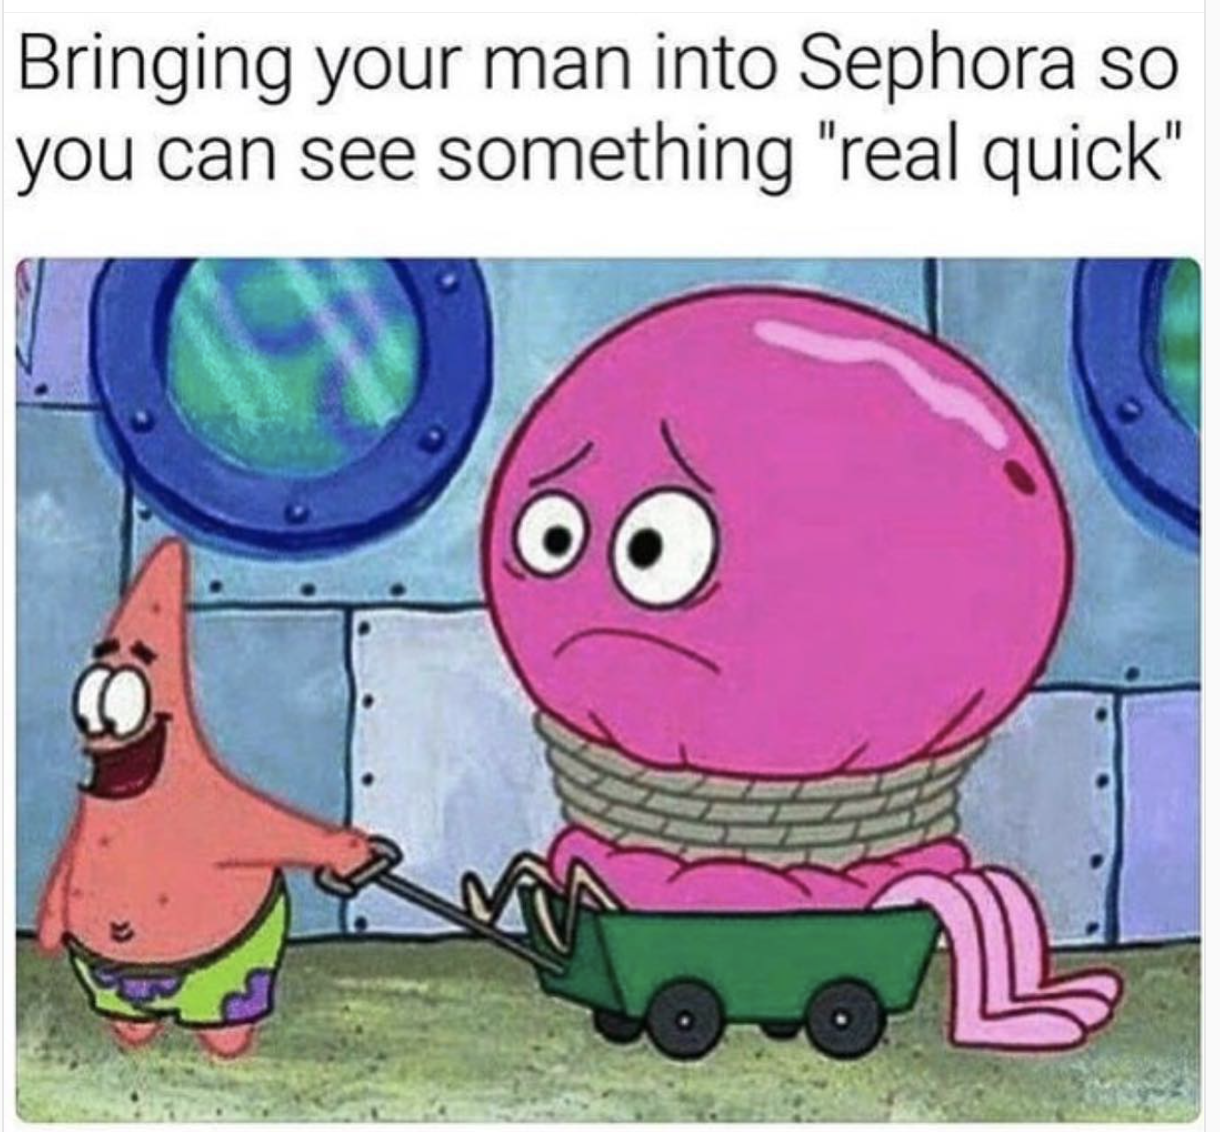 drag your friend meme - Bringing your man into Sephora so you can see something "real quick"